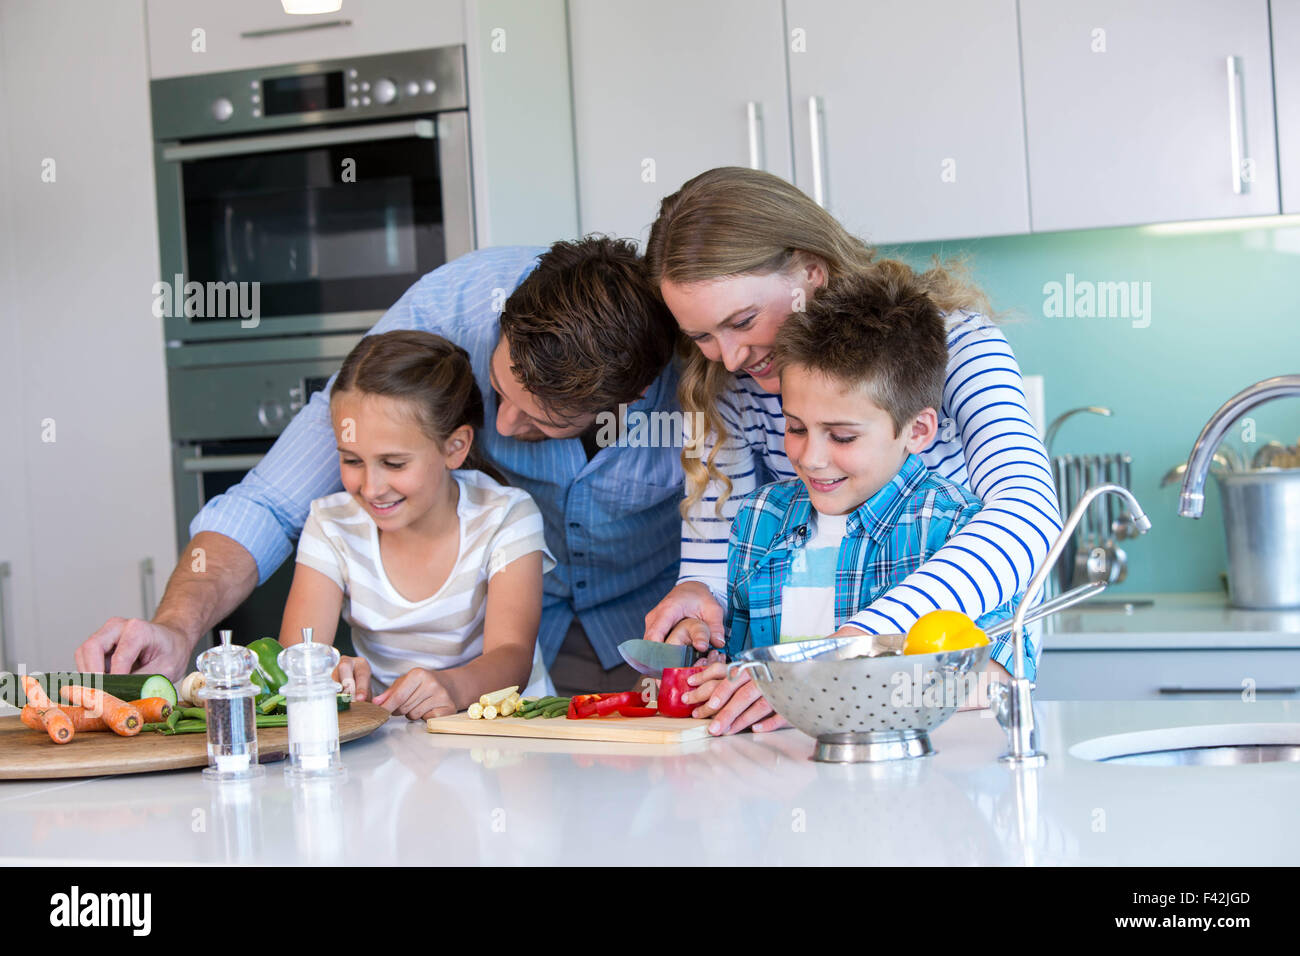 Happy family preparing vegetables together Stock Photo